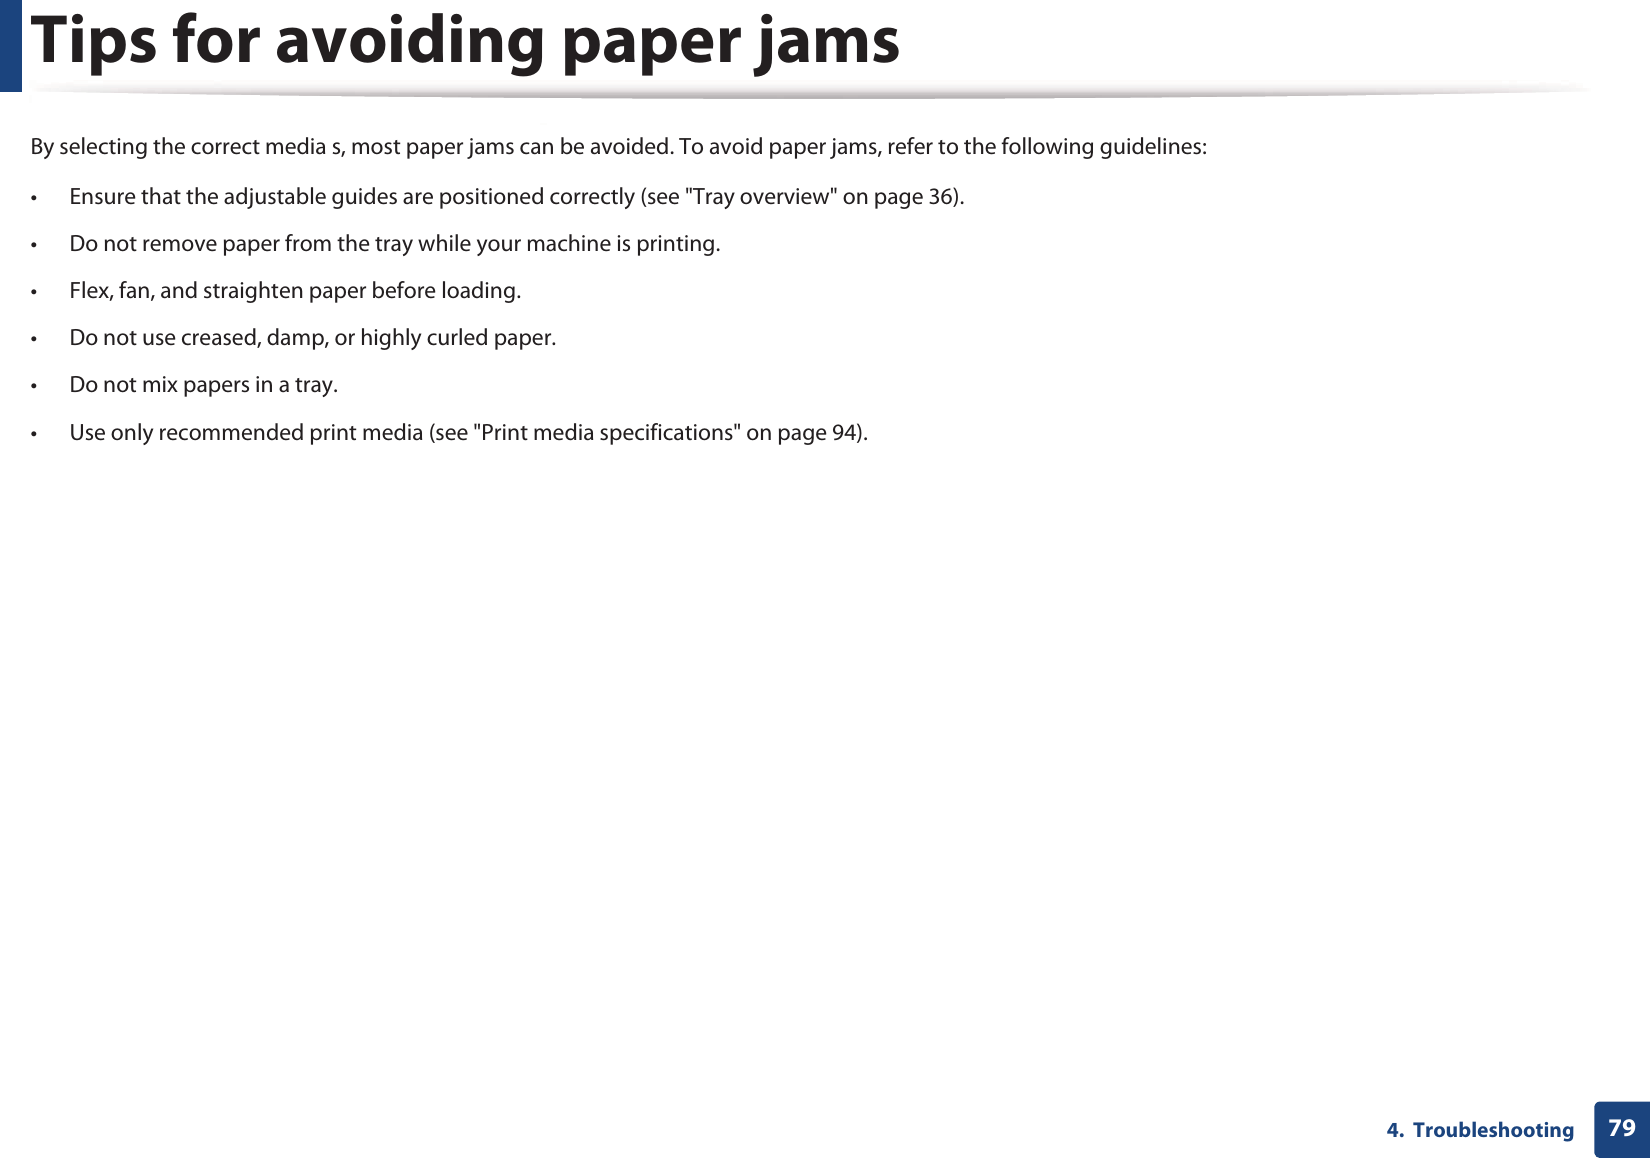 794.  TroubleshootingTips for avoiding paper jamsBy selecting the correct media s, most paper jams can be avoided. To avoid paper jams, refer to the following guidelines:• Ensure that the adjustable guides are positioned correctly (see &quot;Tray overview&quot; on page 36).• Do not remove paper from the tray while your machine is printing.• Flex, fan, and straighten paper before loading. • Do not use creased, damp, or highly curled paper.• Do not mix papers in a tray.• Use only recommended print media (see &quot;Print media specifications&quot; on page 94).